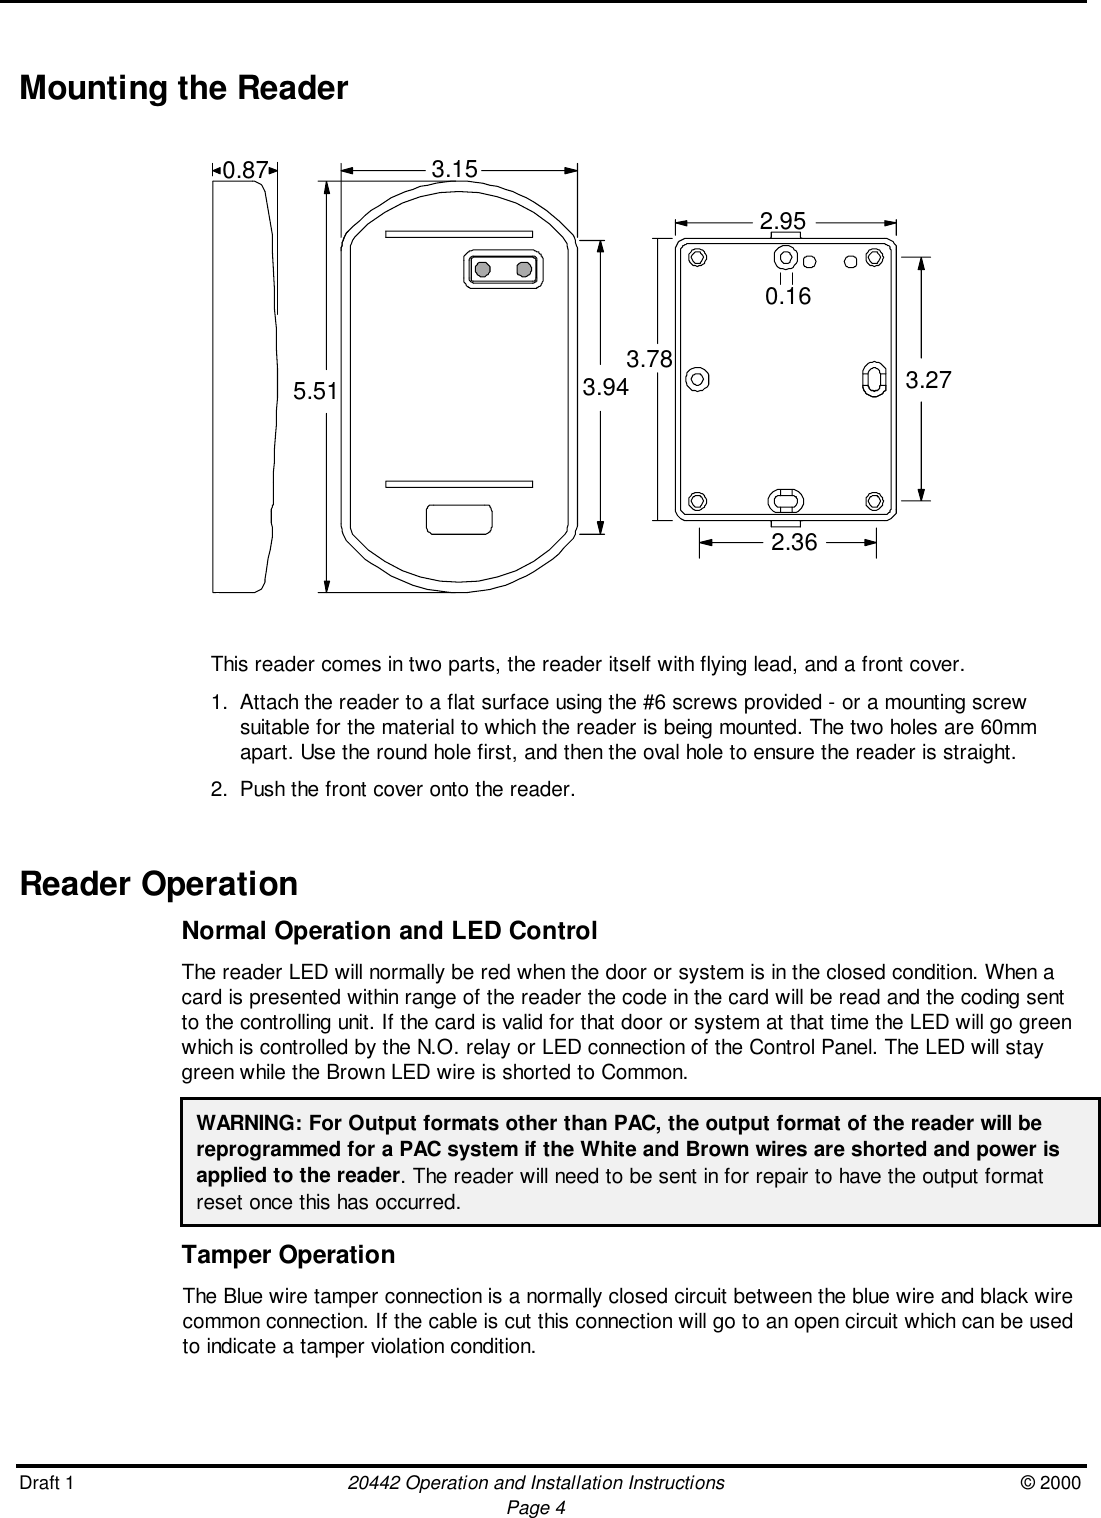 Draft 1 20442 Operation and Installation Instructions © 2000Page 4Mounting the Reader0.87 3.155.51 3.942.952.363.78 3.270.16This reader comes in two parts, the reader itself with flying lead, and a front cover.1. Attach the reader to a flat surface using the #6 screws provided - or a mounting screwsuitable for the material to which the reader is being mounted. The two holes are 60mmapart. Use the round hole first, and then the oval hole to ensure the reader is straight.2. Push the front cover onto the reader.Reader OperationNormal Operation and LED ControlThe reader LED will normally be red when the door or system is in the closed condition. When acard is presented within range of the reader the code in the card will be read and the coding sentto the controlling unit. If the card is valid for that door or system at that time the LED will go greenwhich is controlled by the N.O. relay or LED connection of the Control Panel. The LED will staygreen while the Brown LED wire is shorted to Common.WARNING: For Output formats other than PAC, the output format of the reader will bereprogrammed for a PAC system if the White and Brown wires are shorted and power isapplied to the reader. The reader will need to be sent in for repair to have the output formatreset once this has occurred.Tamper OperationThe Blue wire tamper connection is a normally closed circuit between the blue wire and black wirecommon connection. If the cable is cut this connection will go to an open circuit which can be usedto indicate a tamper violation condition.